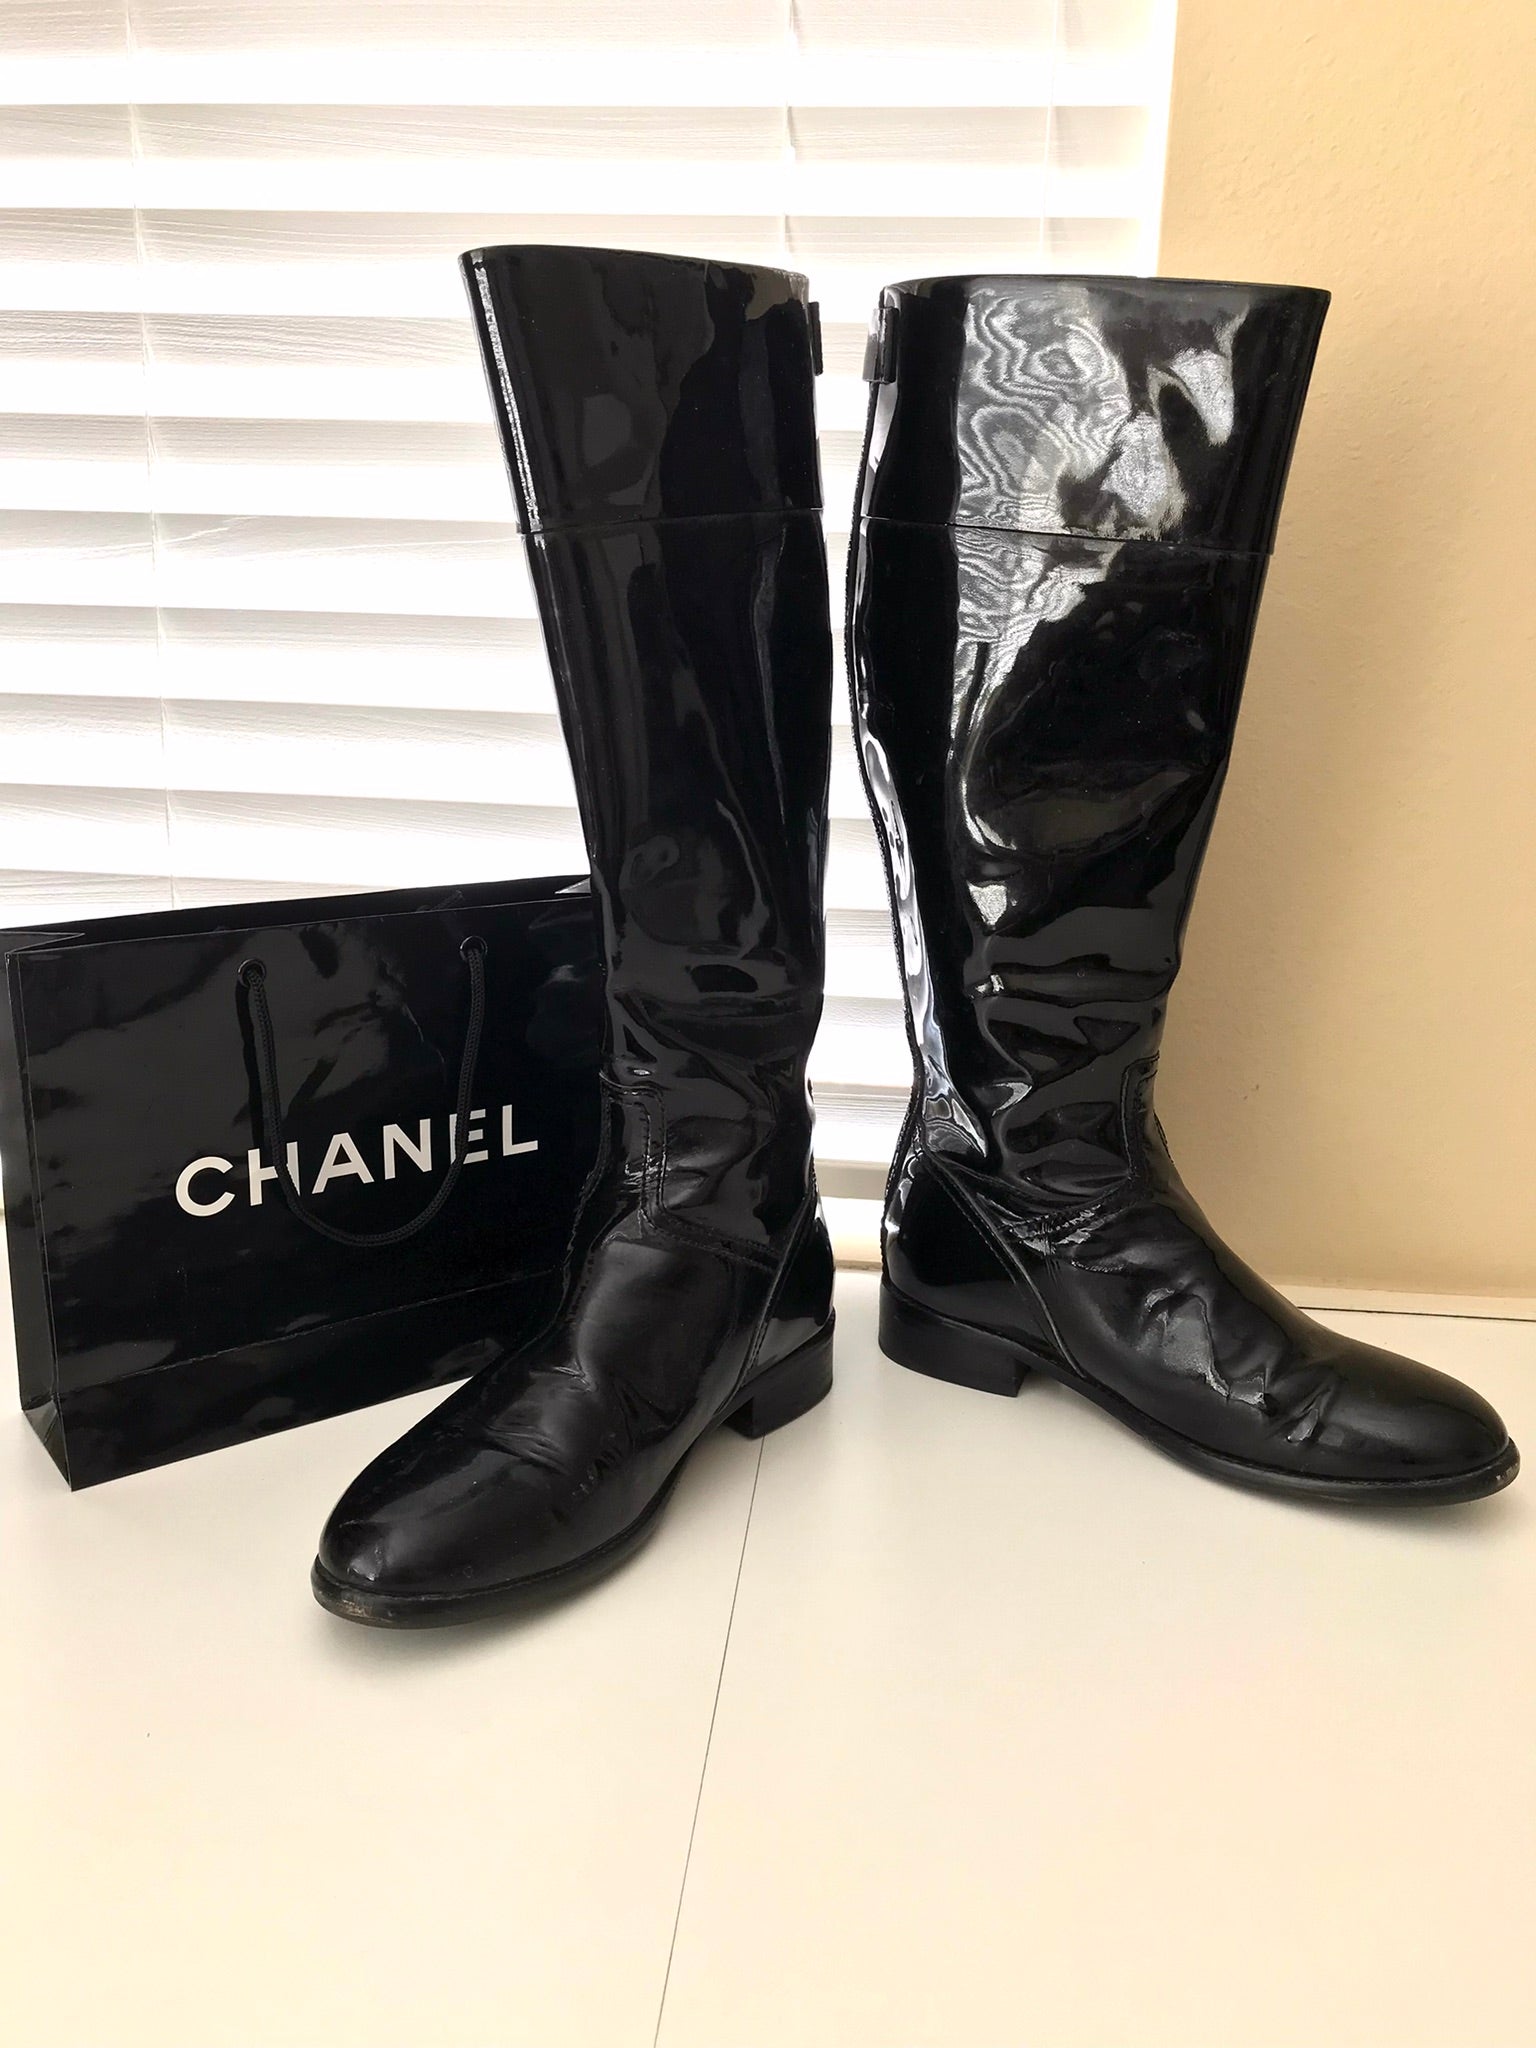 Chanel Silver Boots in Size 41 - Lou's Closet